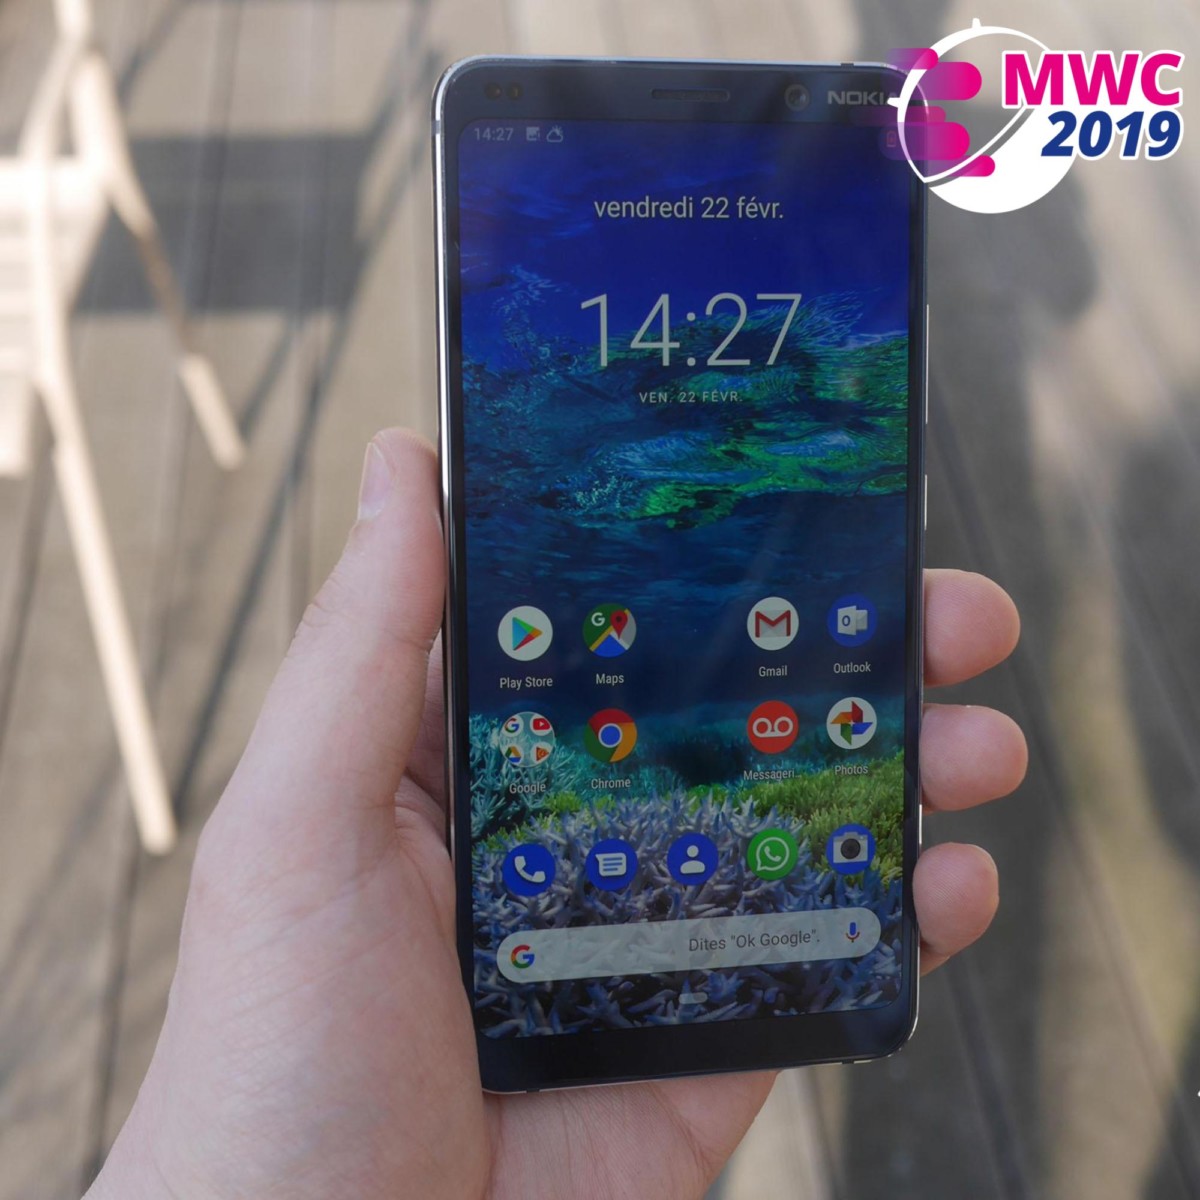 MWC 2019 Nokia 9 Pureview